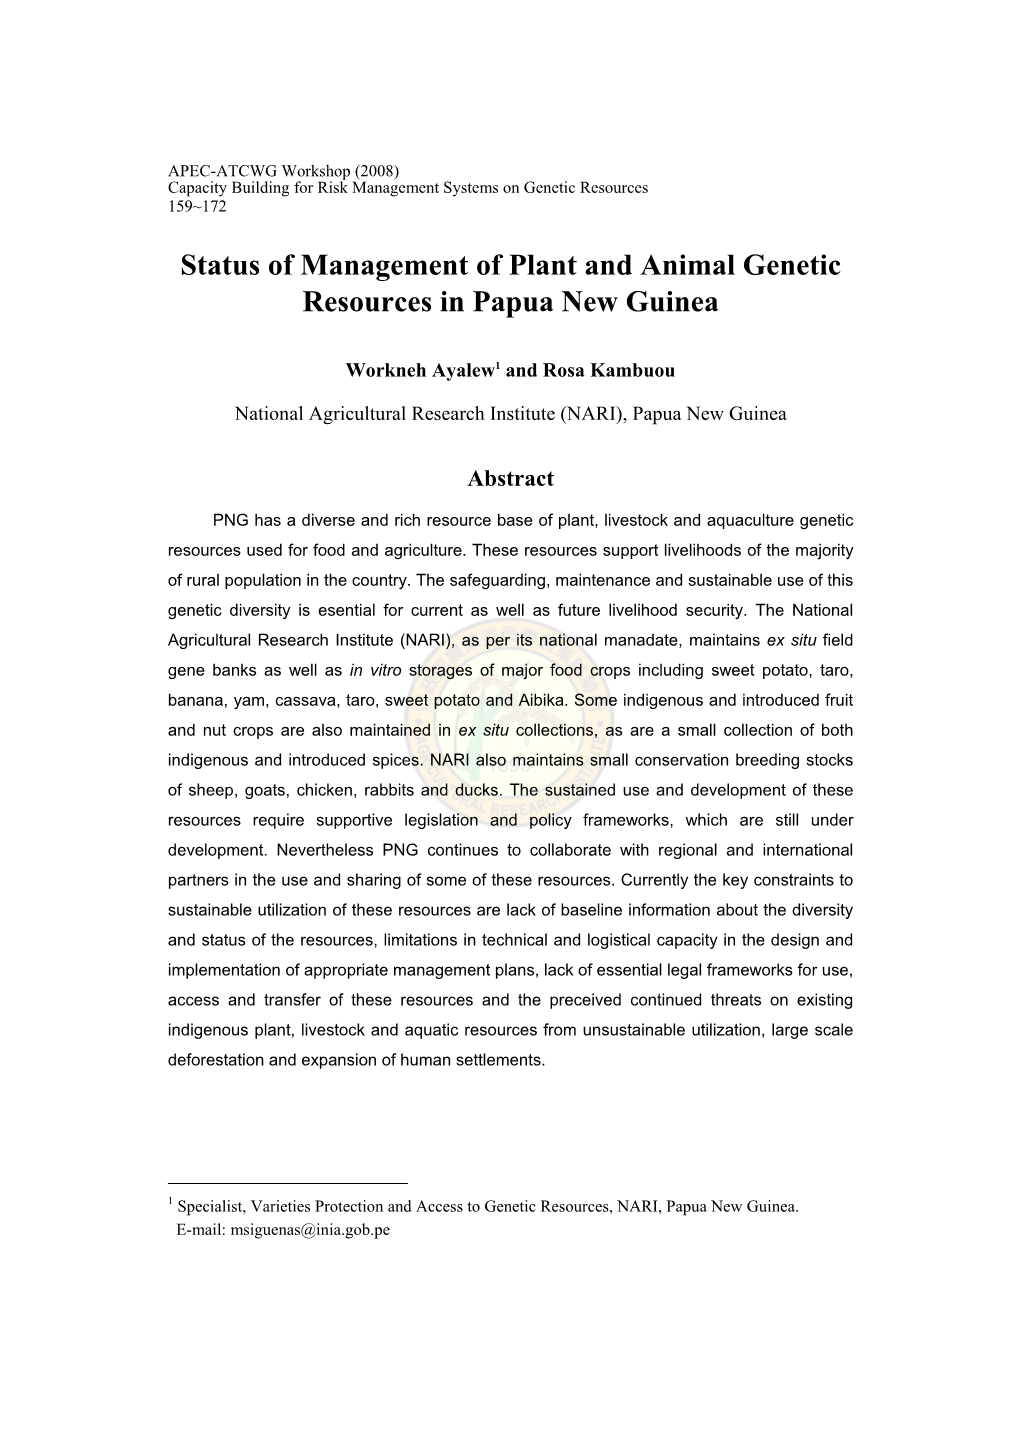 Status of Management of Plant and Animal Genetic Resources in Papua New Guinea